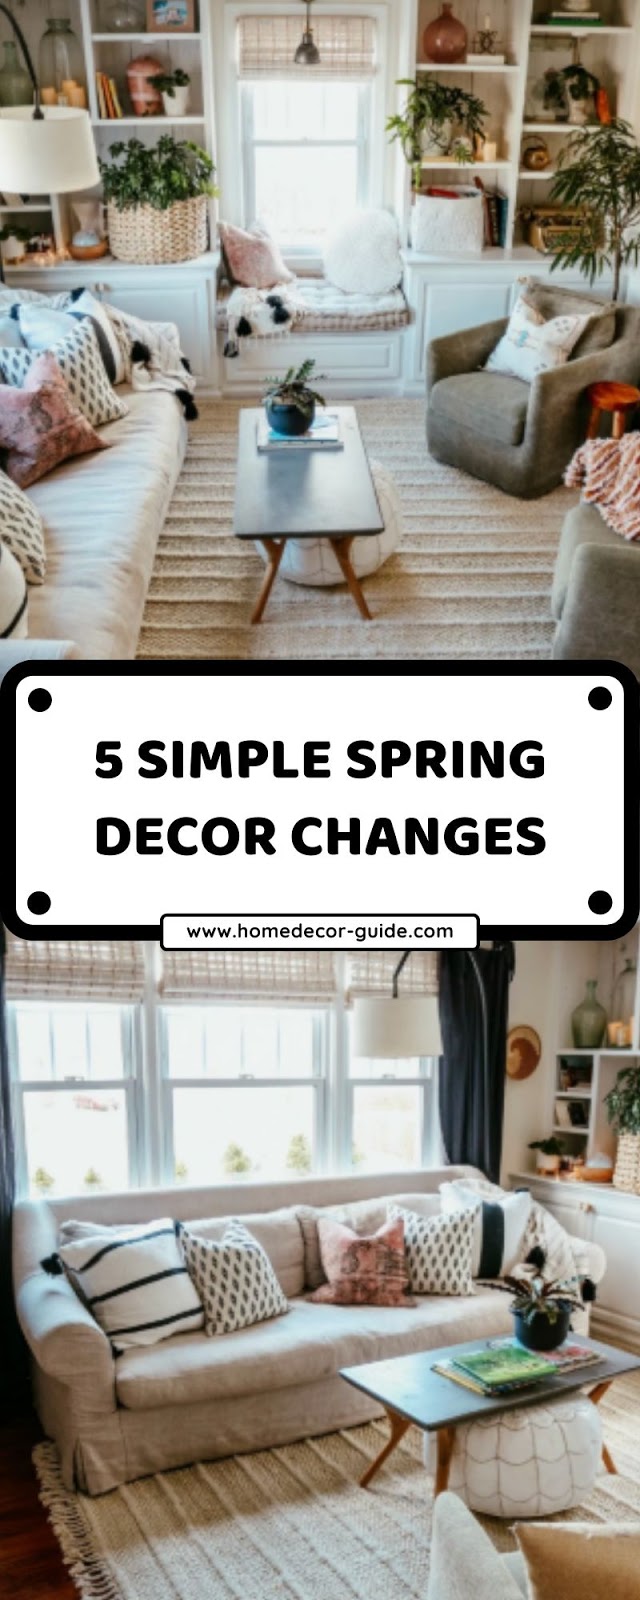 5 SIMPLE SPRING DECOR CHANGES